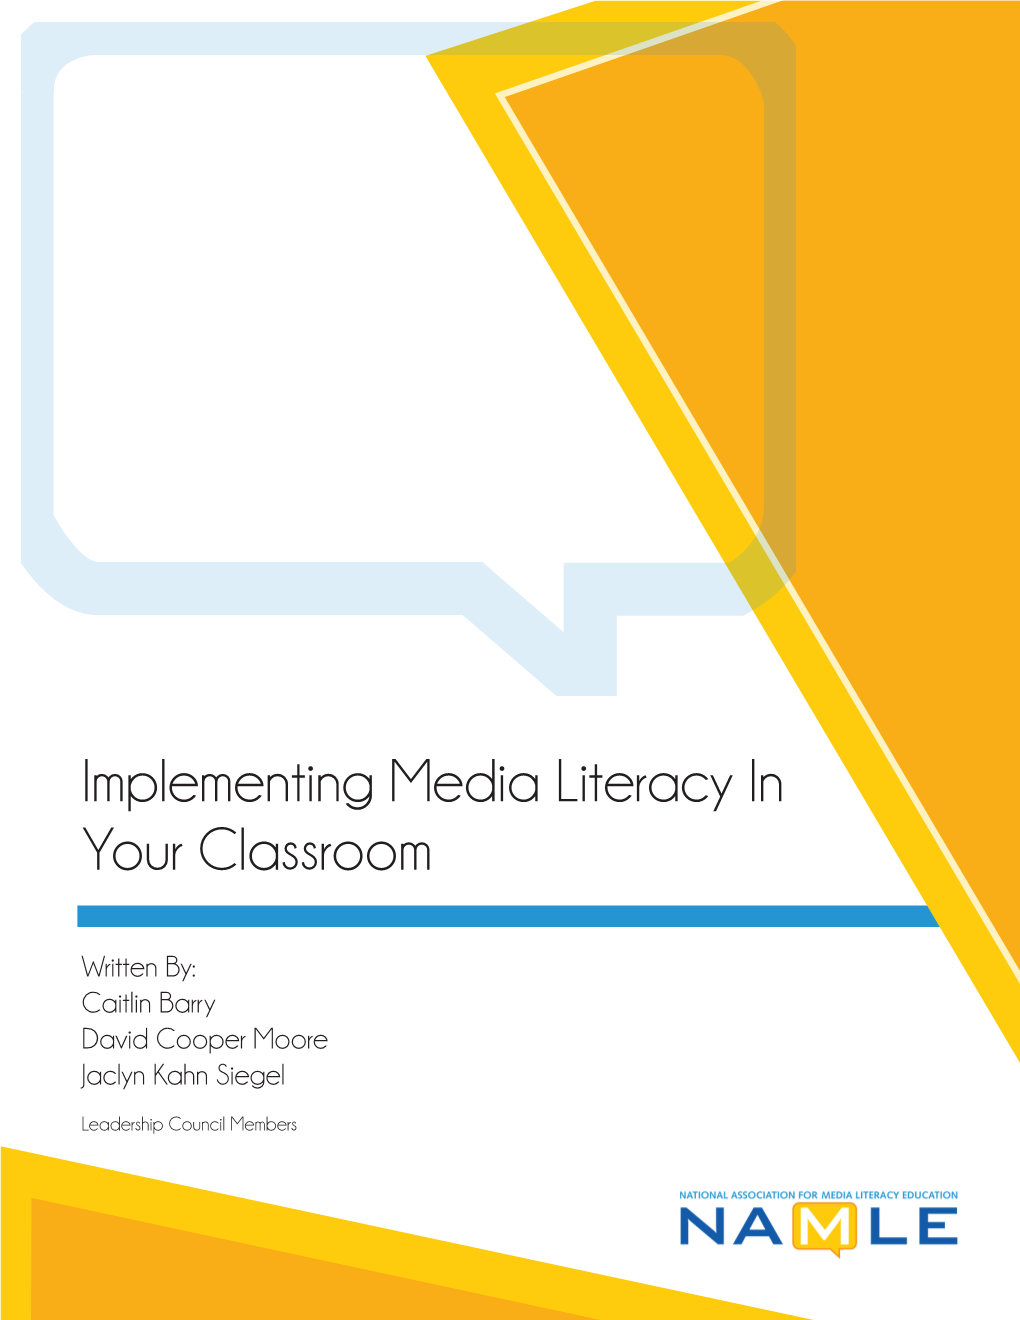 Implementing Media Literacy in Your Classroom